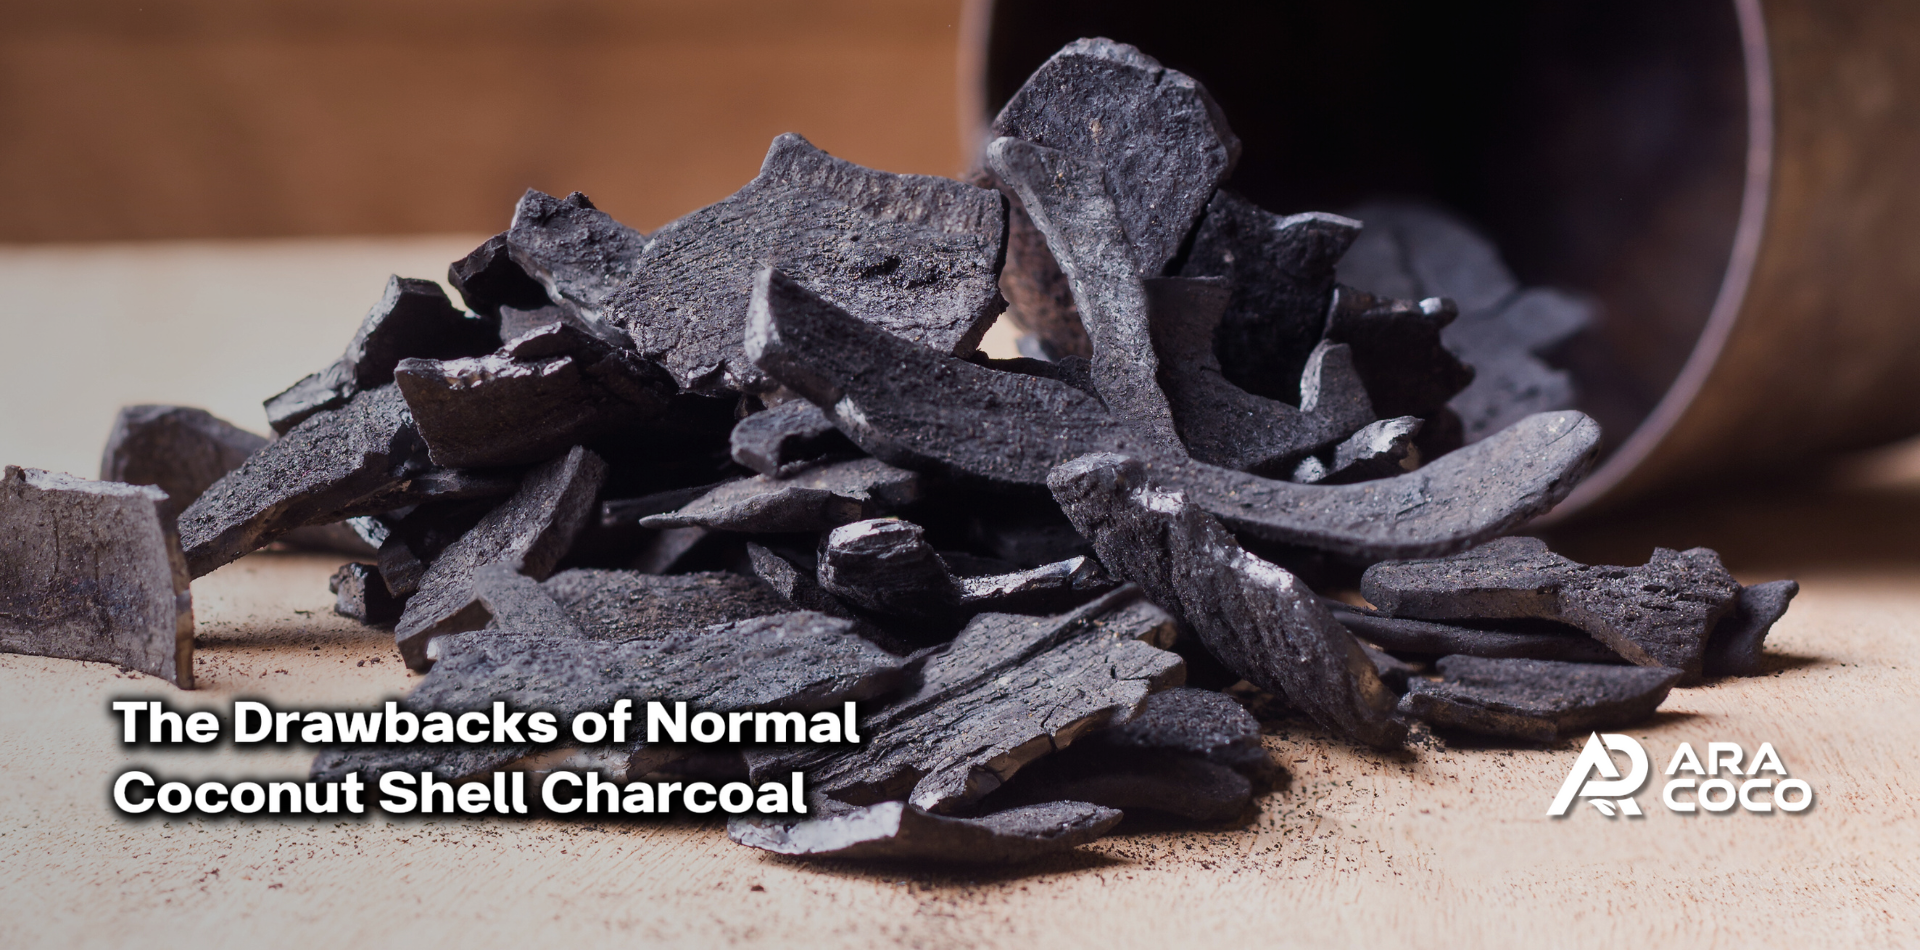 he irregular shape of normal coconut charcoal results in inconsistent burning times and unstable heat, which can disrupt the enjoyment and flavor of the shisha.